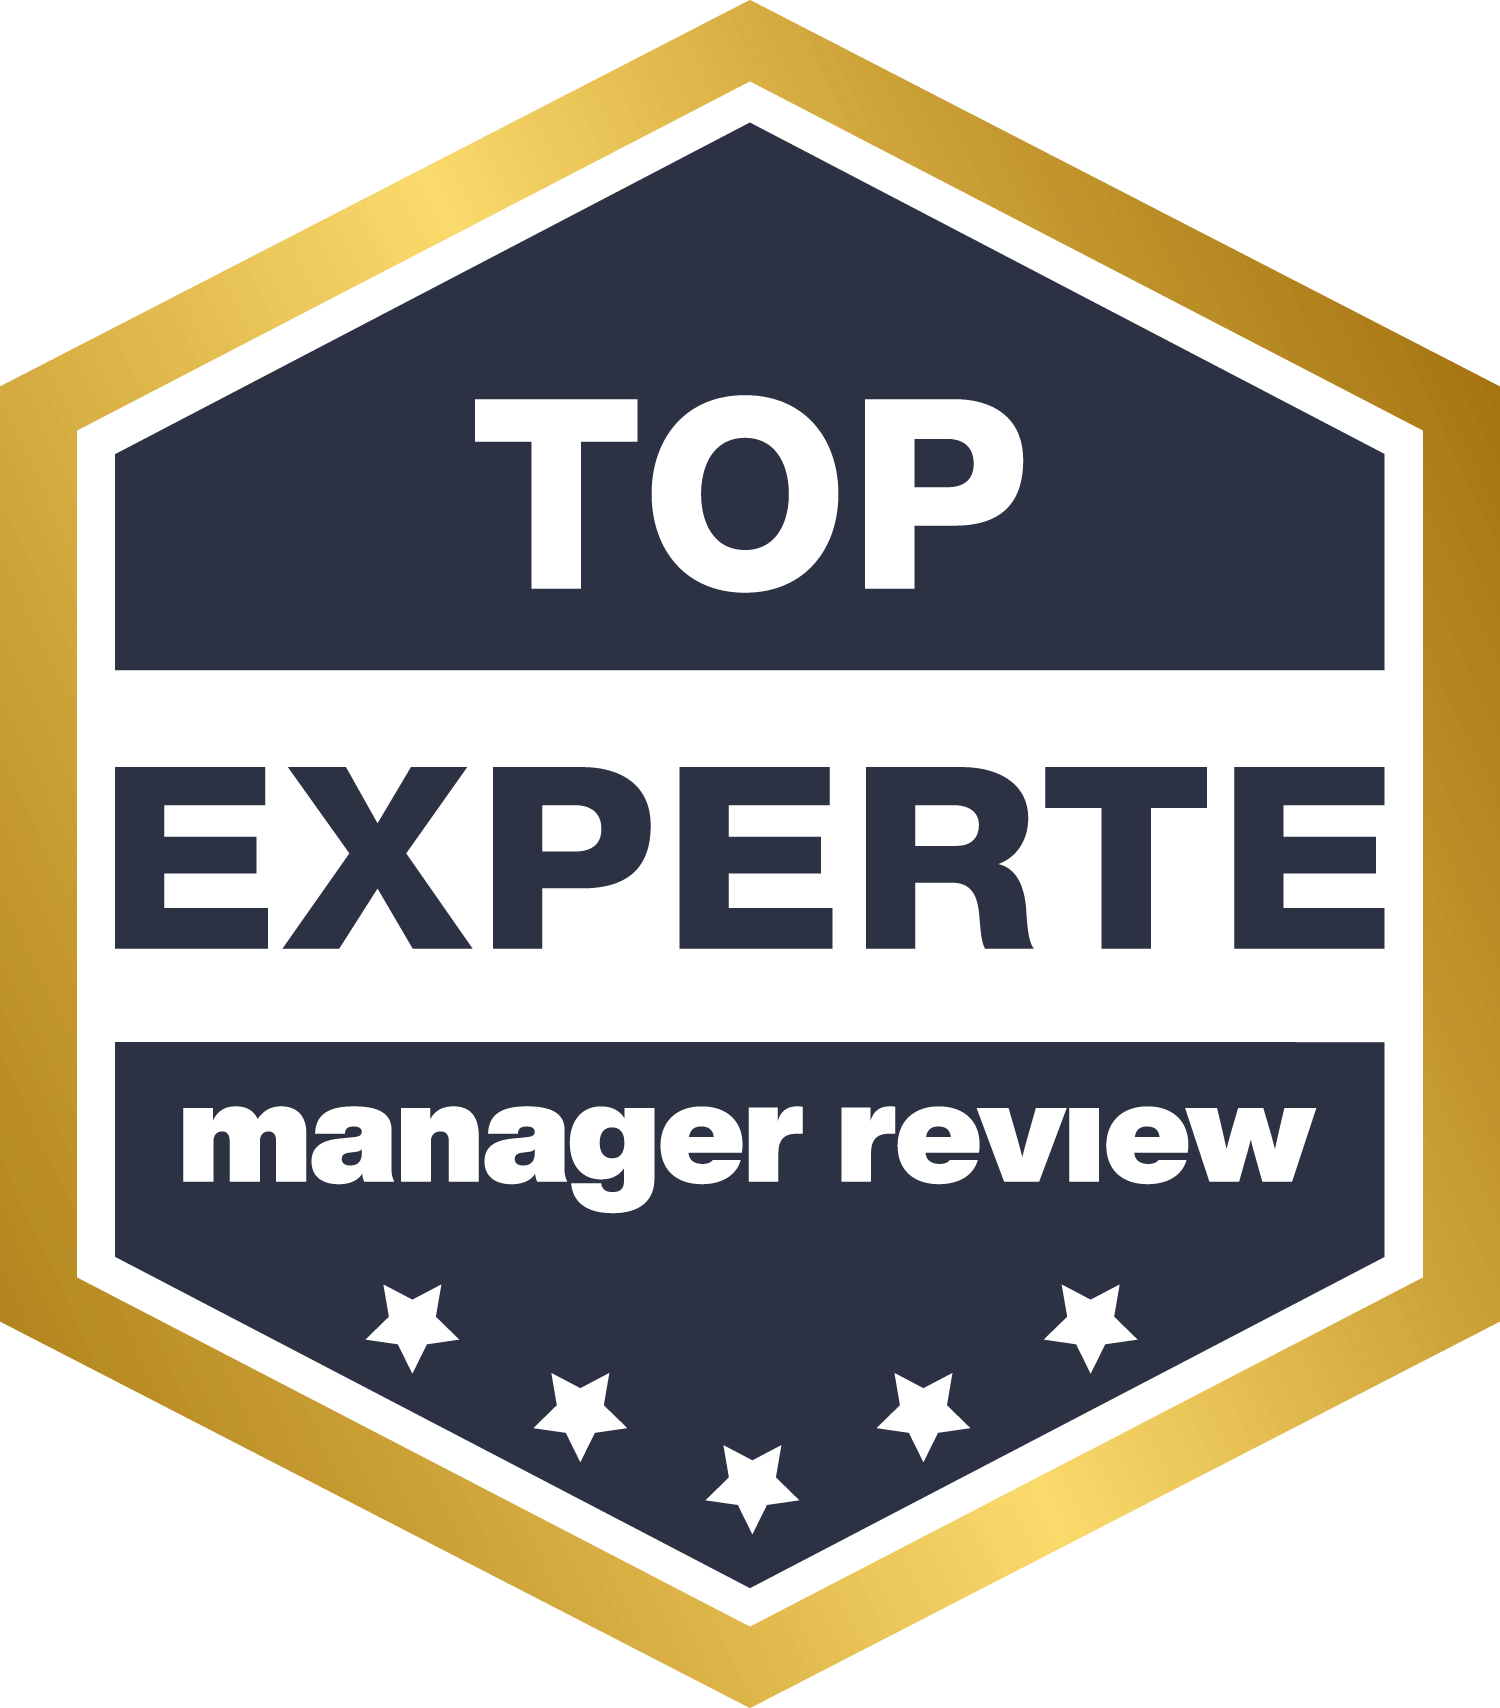 vemeto ist Manager Review Top Experte